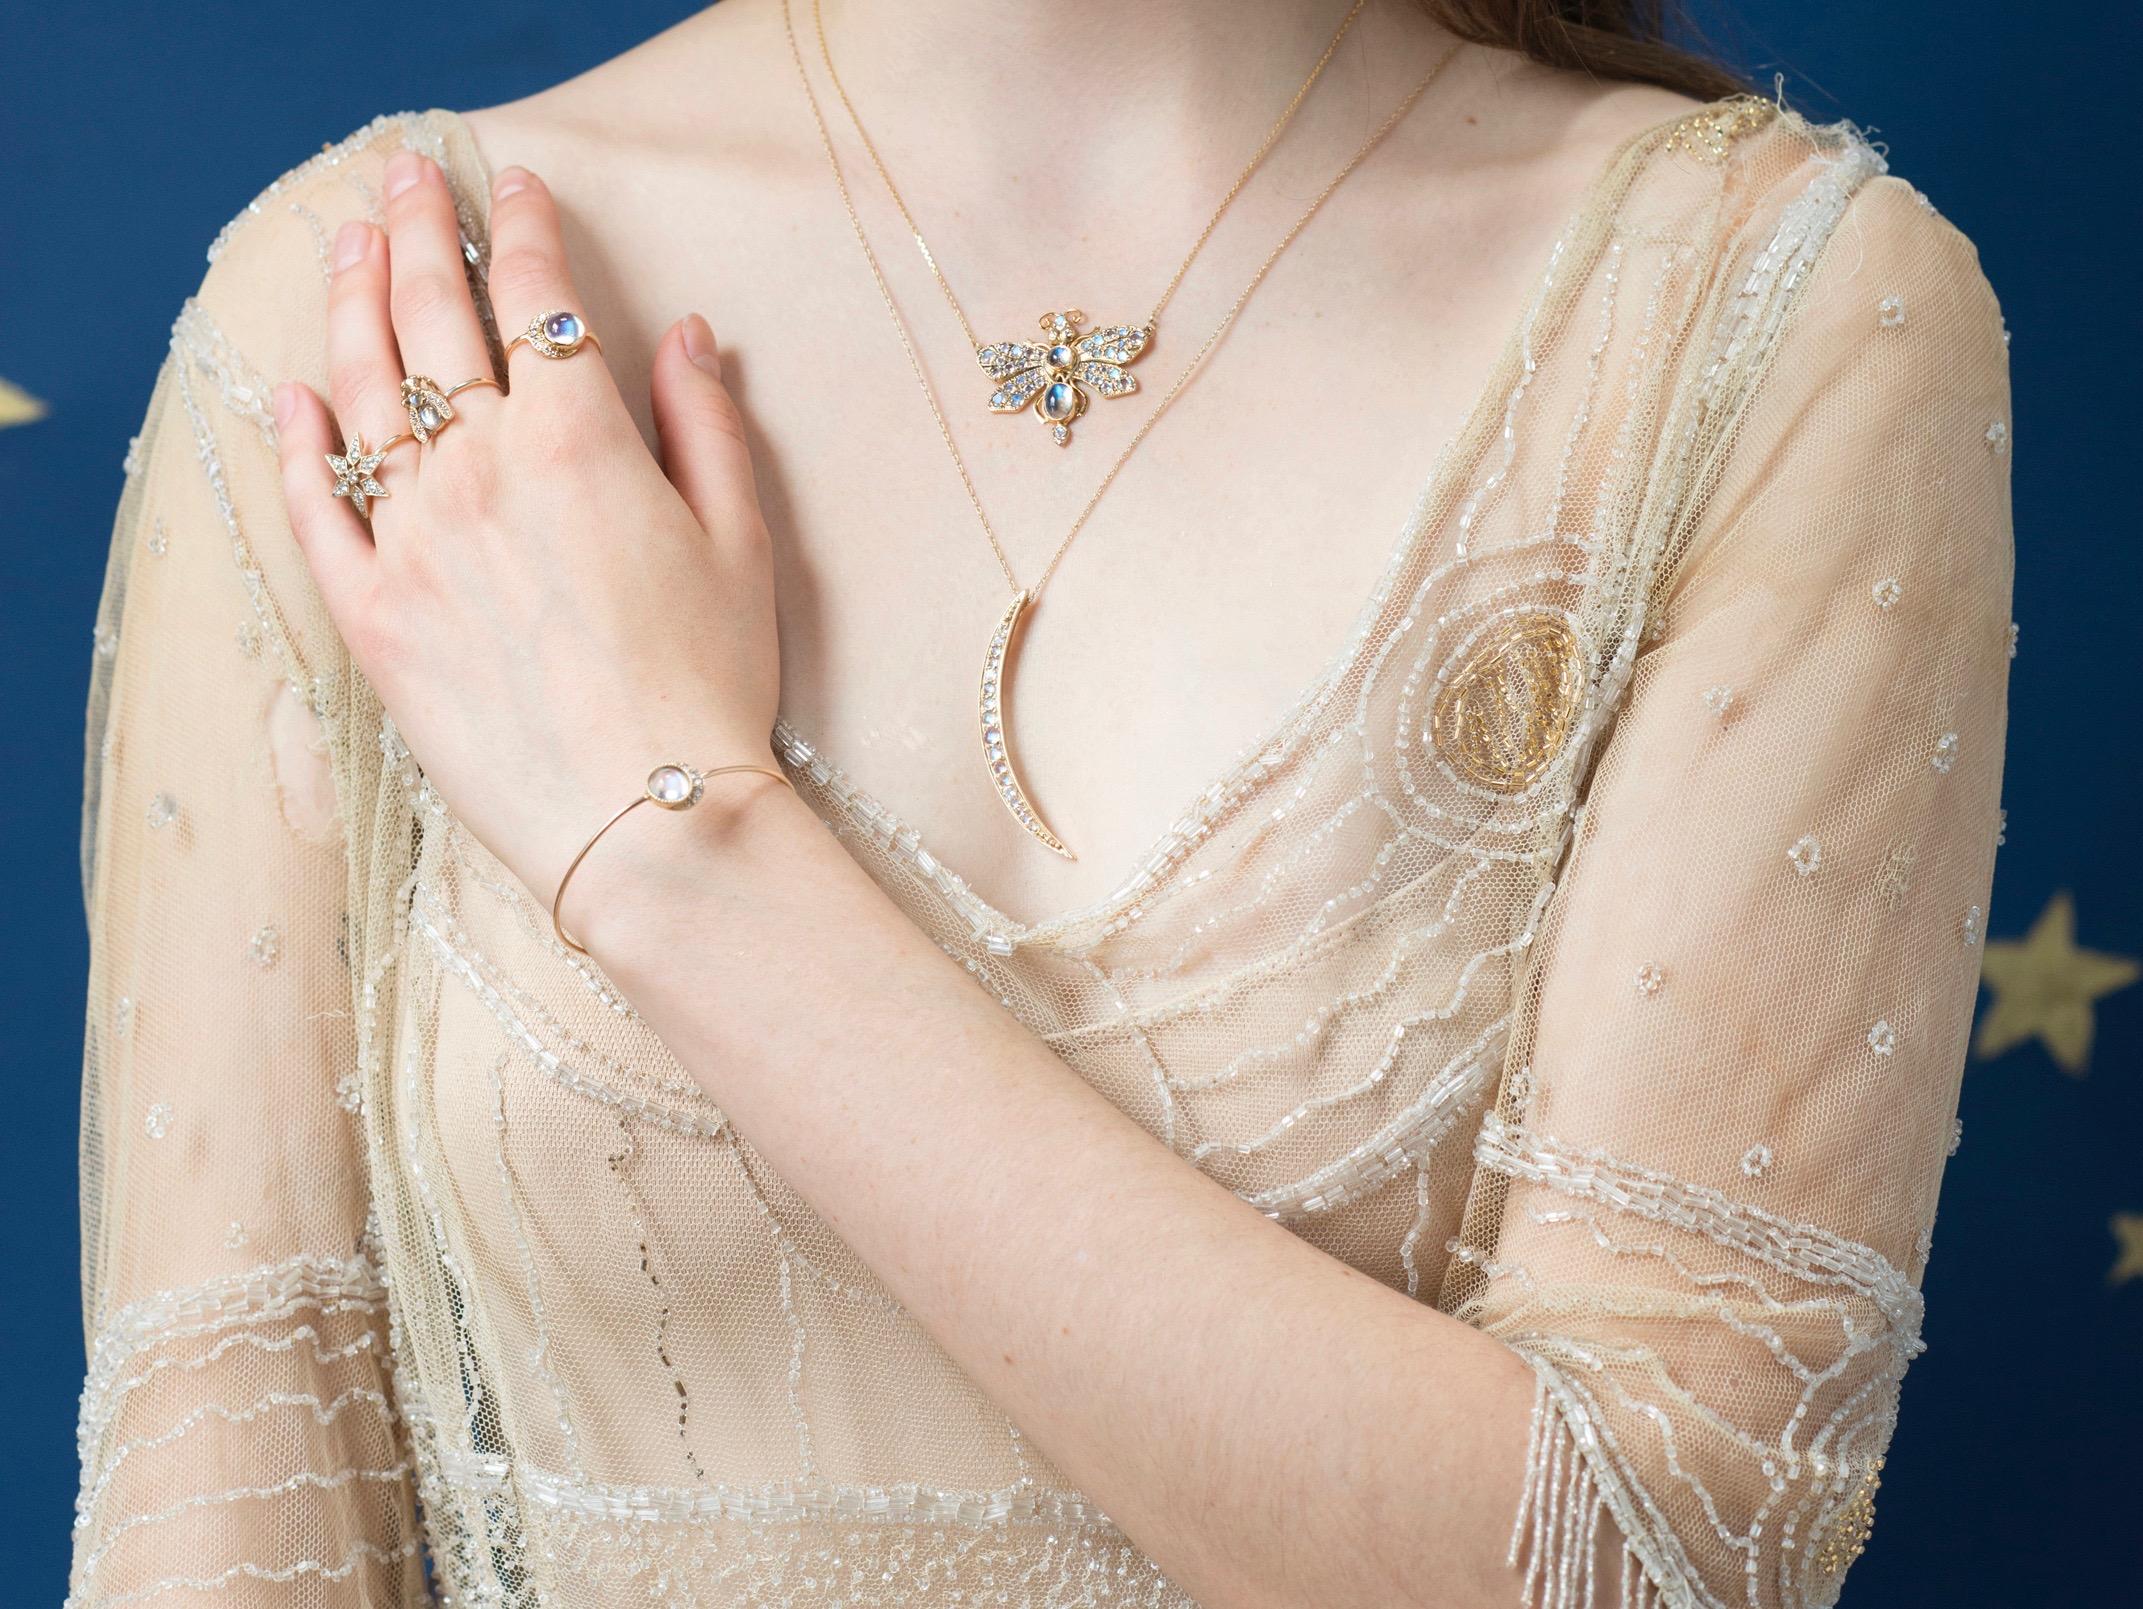 The 'Blackbird and the Snow' exquisite 'Luna Moth' Necklace carries light-catching moonstones on it's delicate wings. Featuring rare, rose cut moonstones set in the wings and the finest quality blue sheet moonstone cabochons in the body. Two